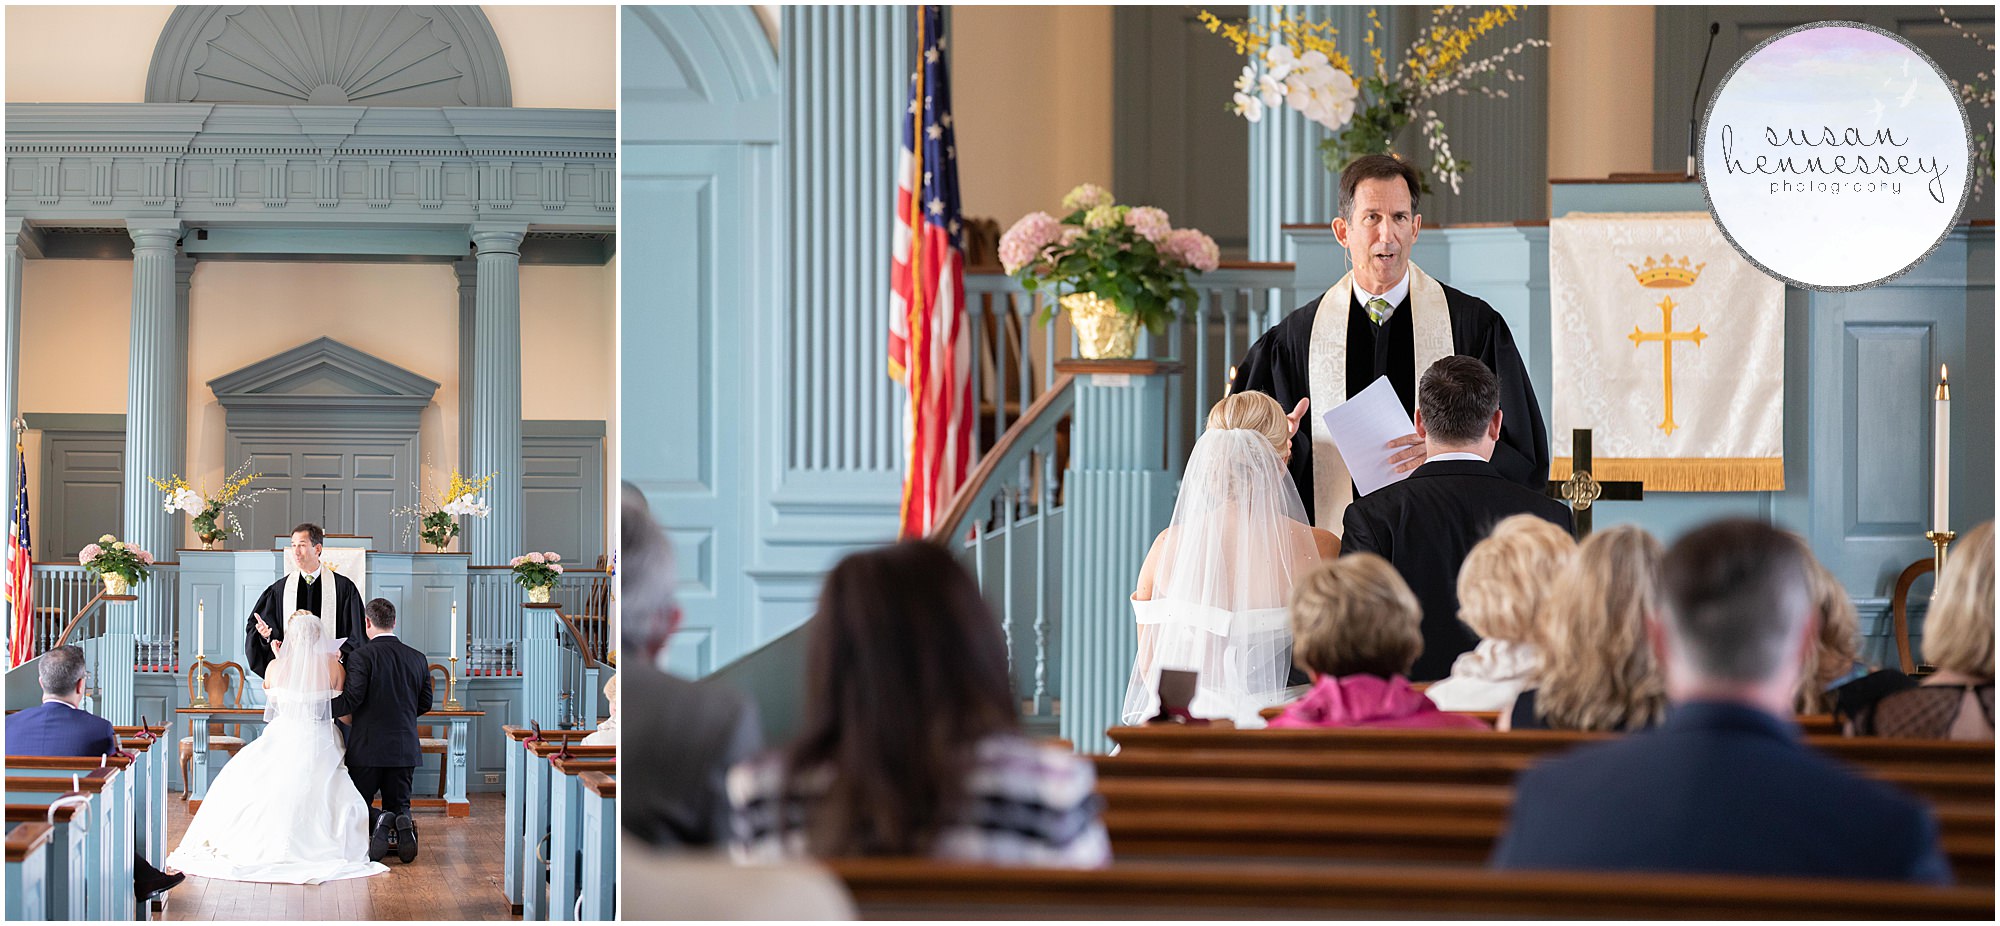 Planning a Micro Wedding? The First Presbyterian Church of Moorestown is the perfect location for a church ceremony.